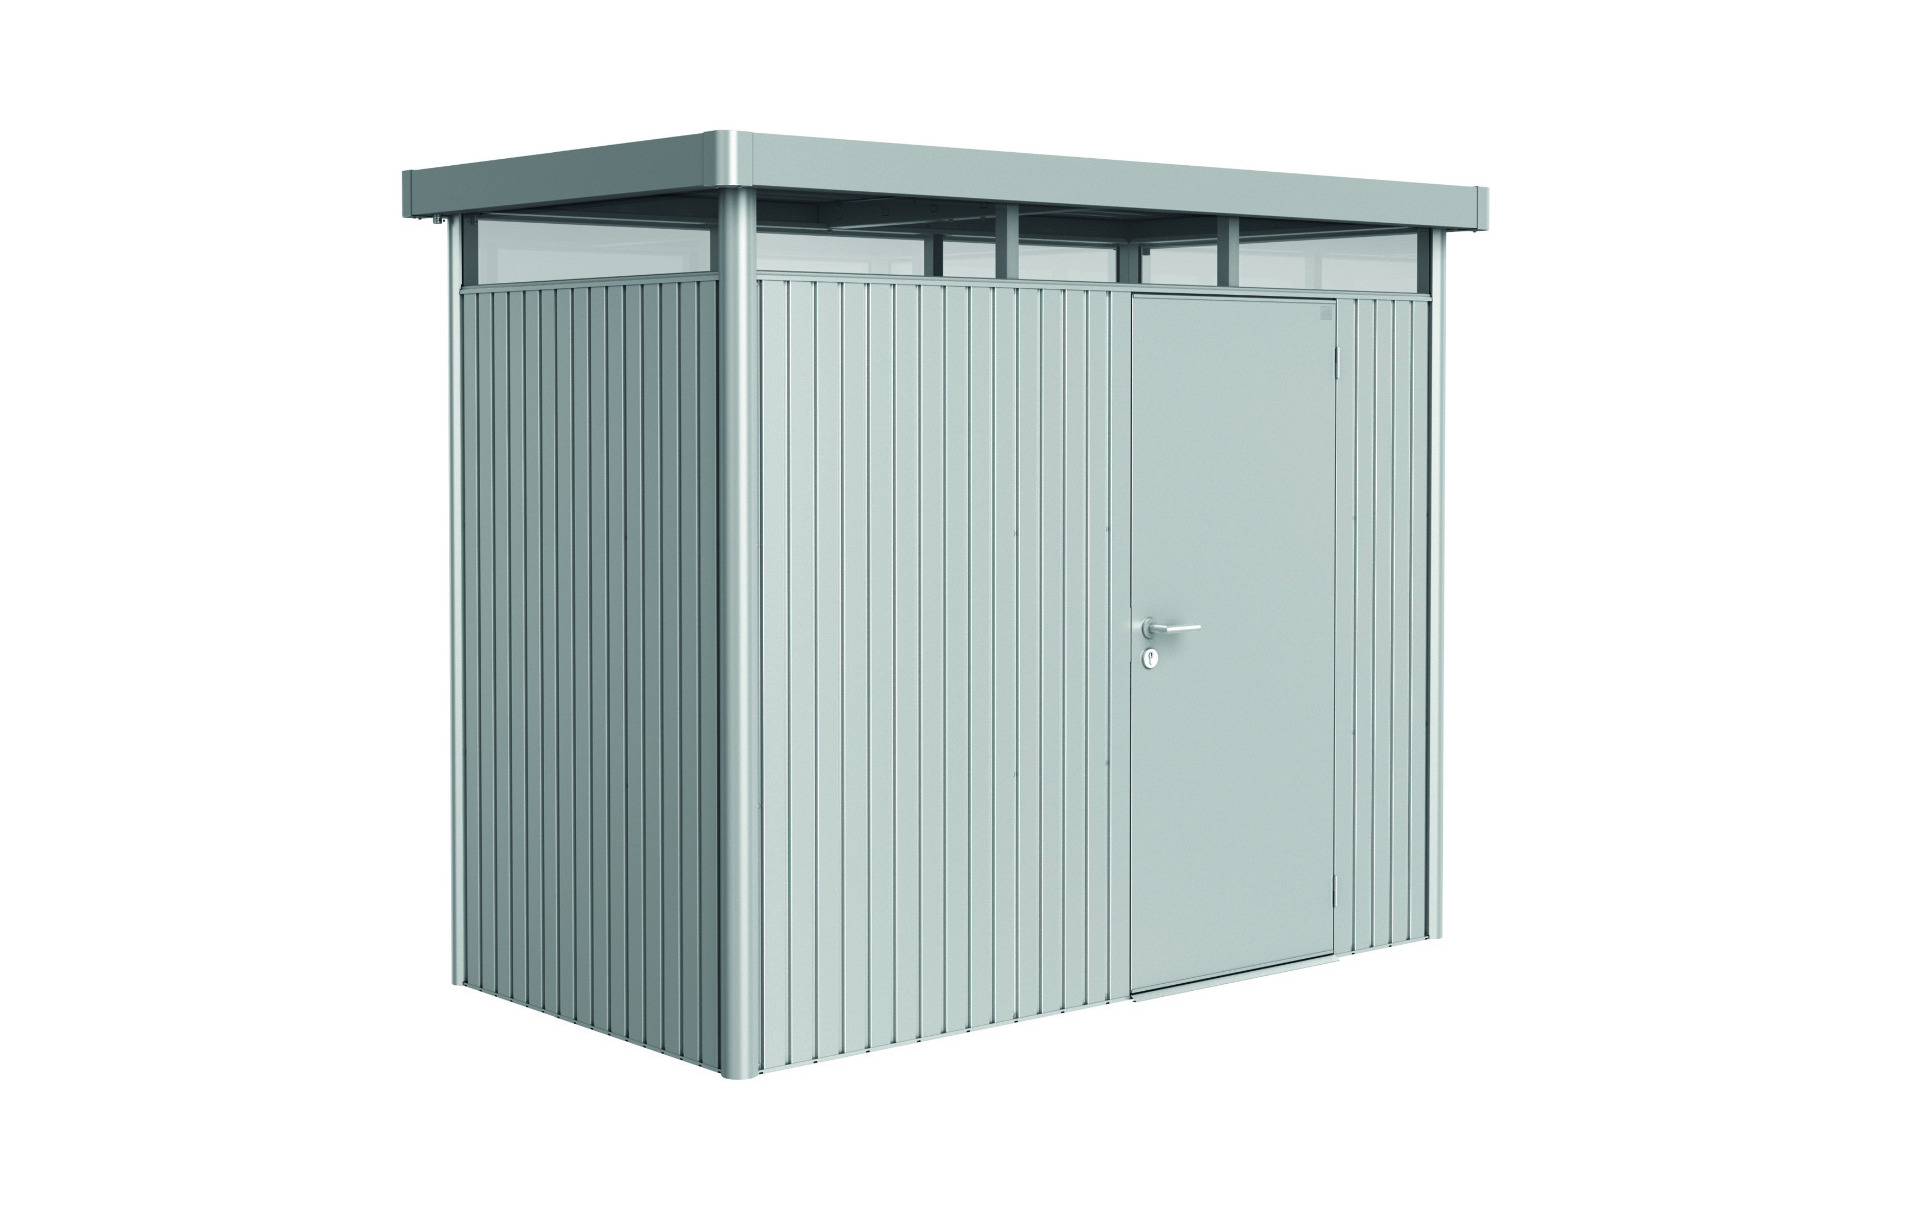 The best offers on Biohort Steel Sheds & Storage Solutions, supplied & fitted - Owen Chubb 087-2306 128en Shed single door in metallic silver